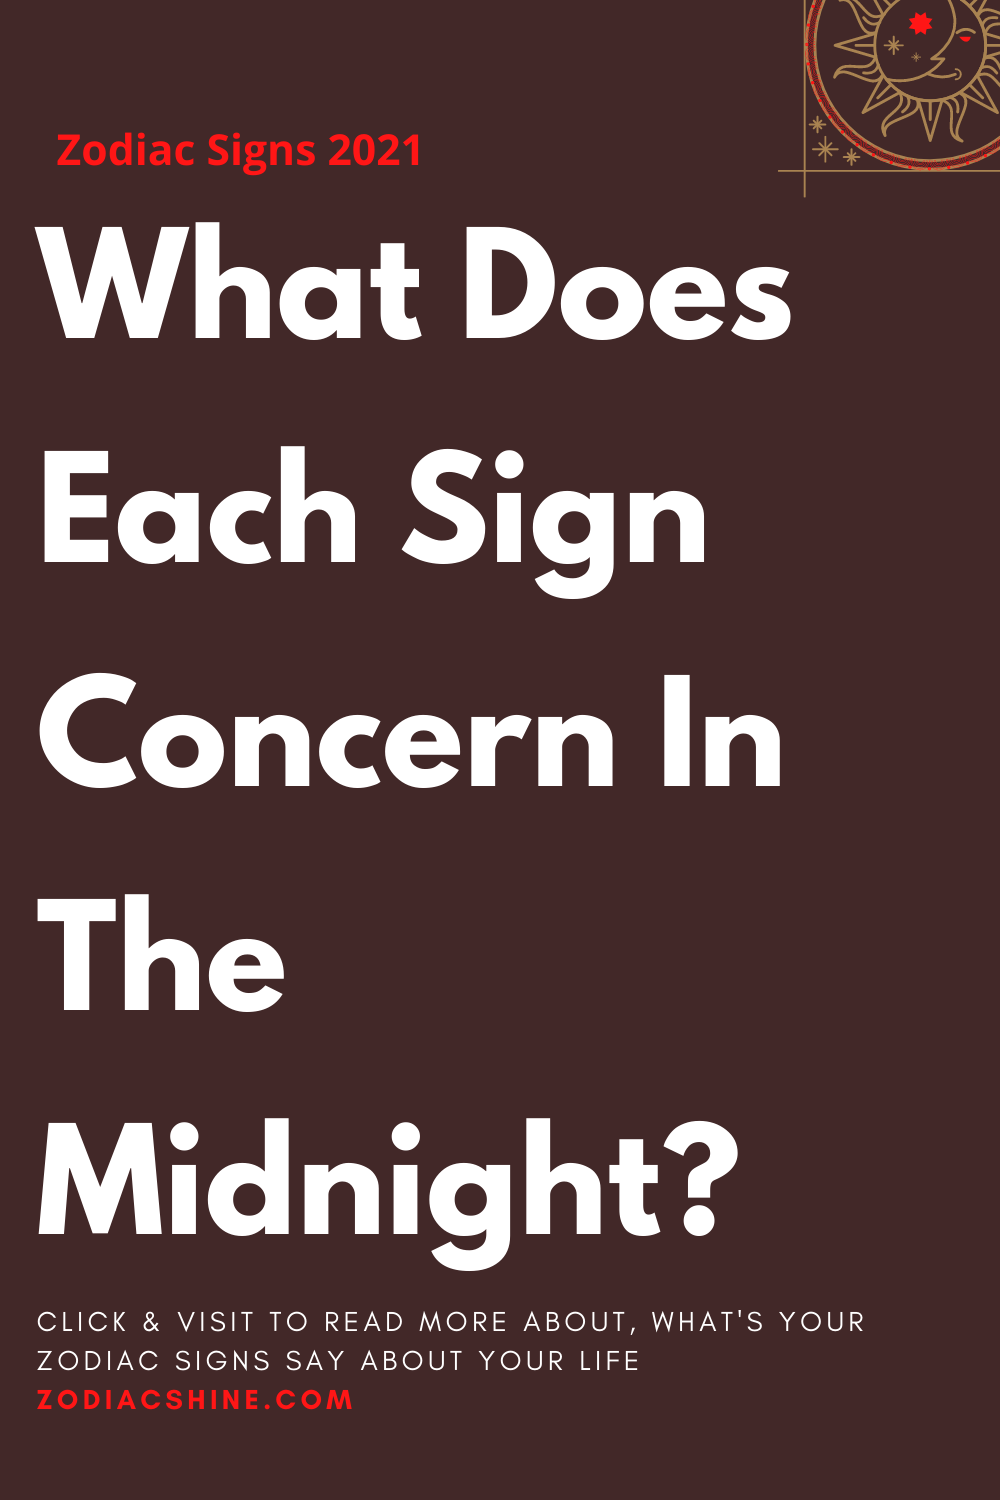 What Does Each Sign Concern In The Midnight?